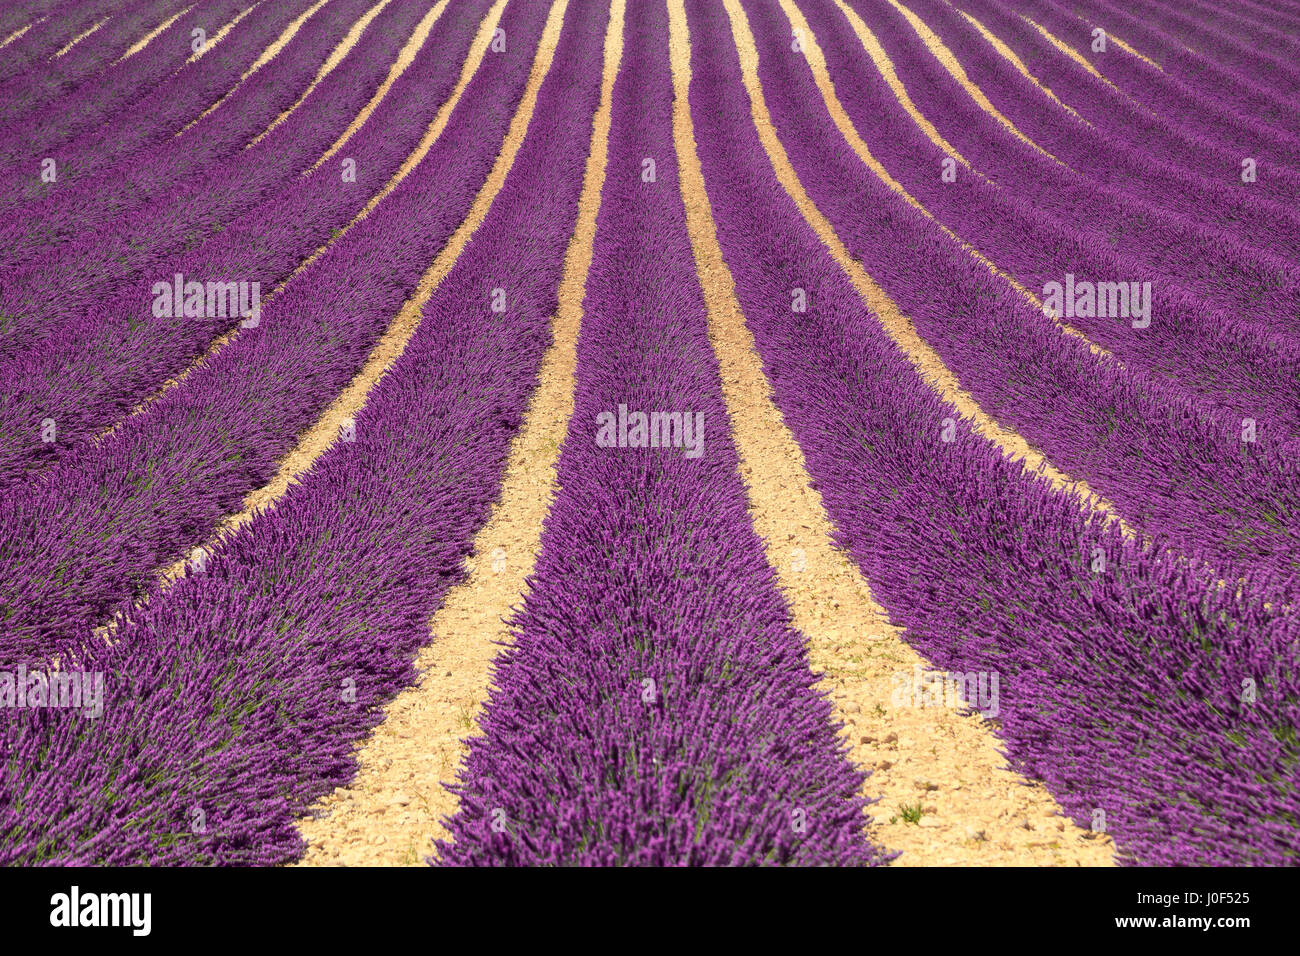 Lavender flower blooming fields in endless rows as a pattern or texture. Landscape in Valensole plateau, Provence, France, Europe. Stock Photo